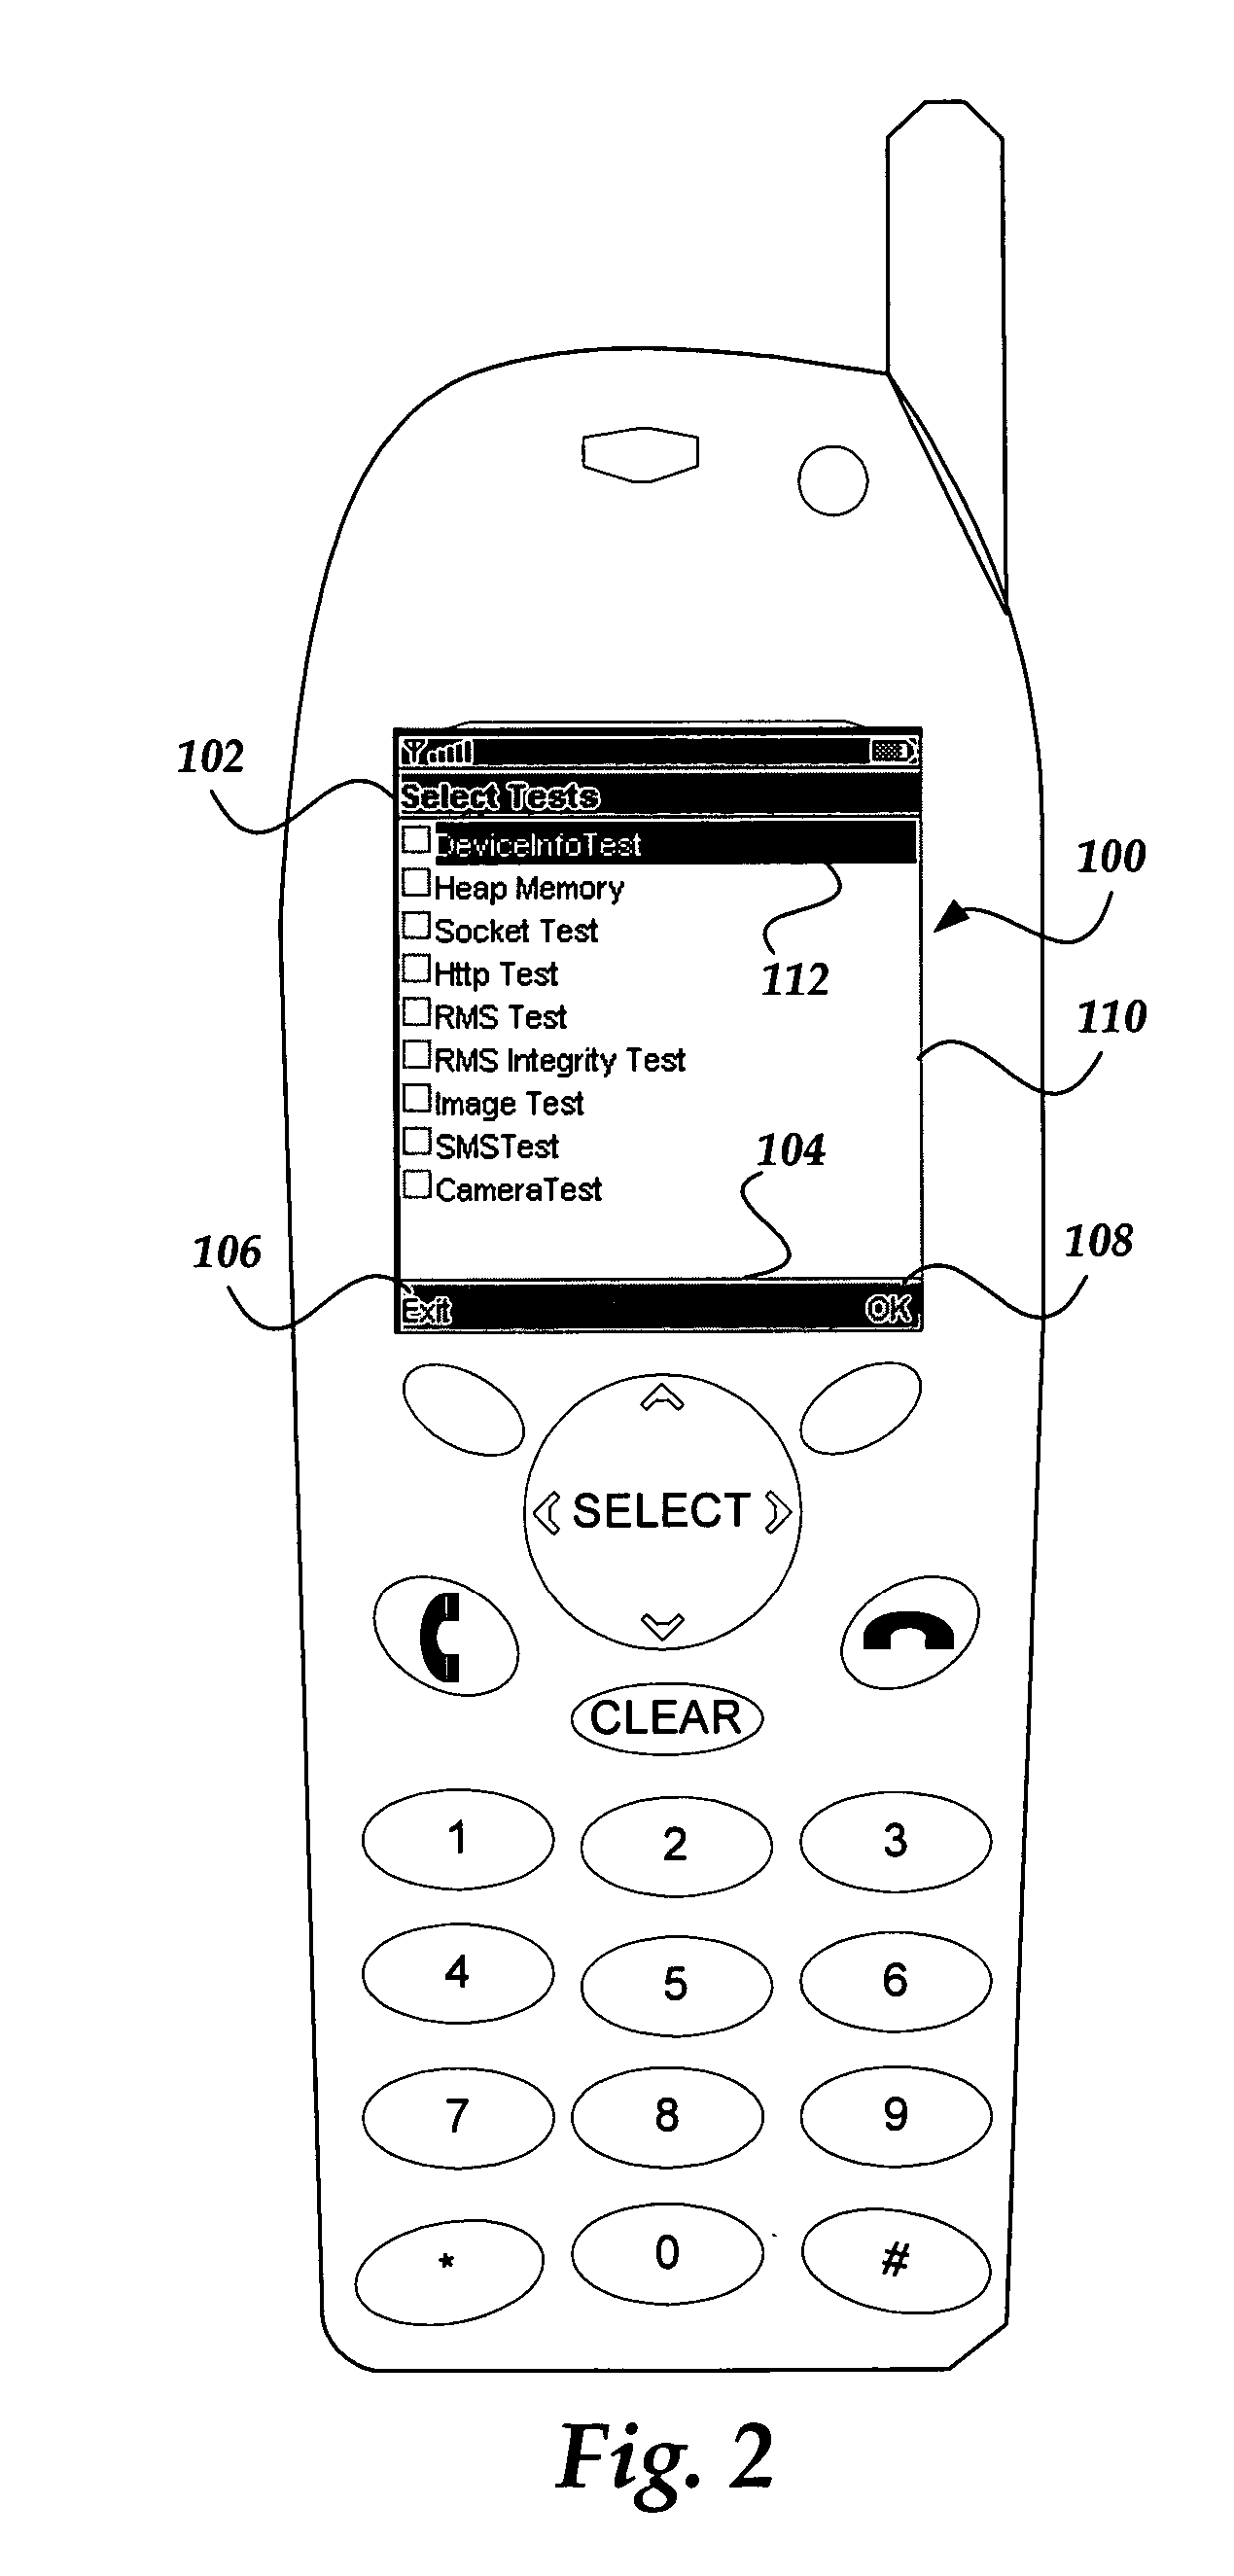 Tester for determining the validity of a feature in a remote device